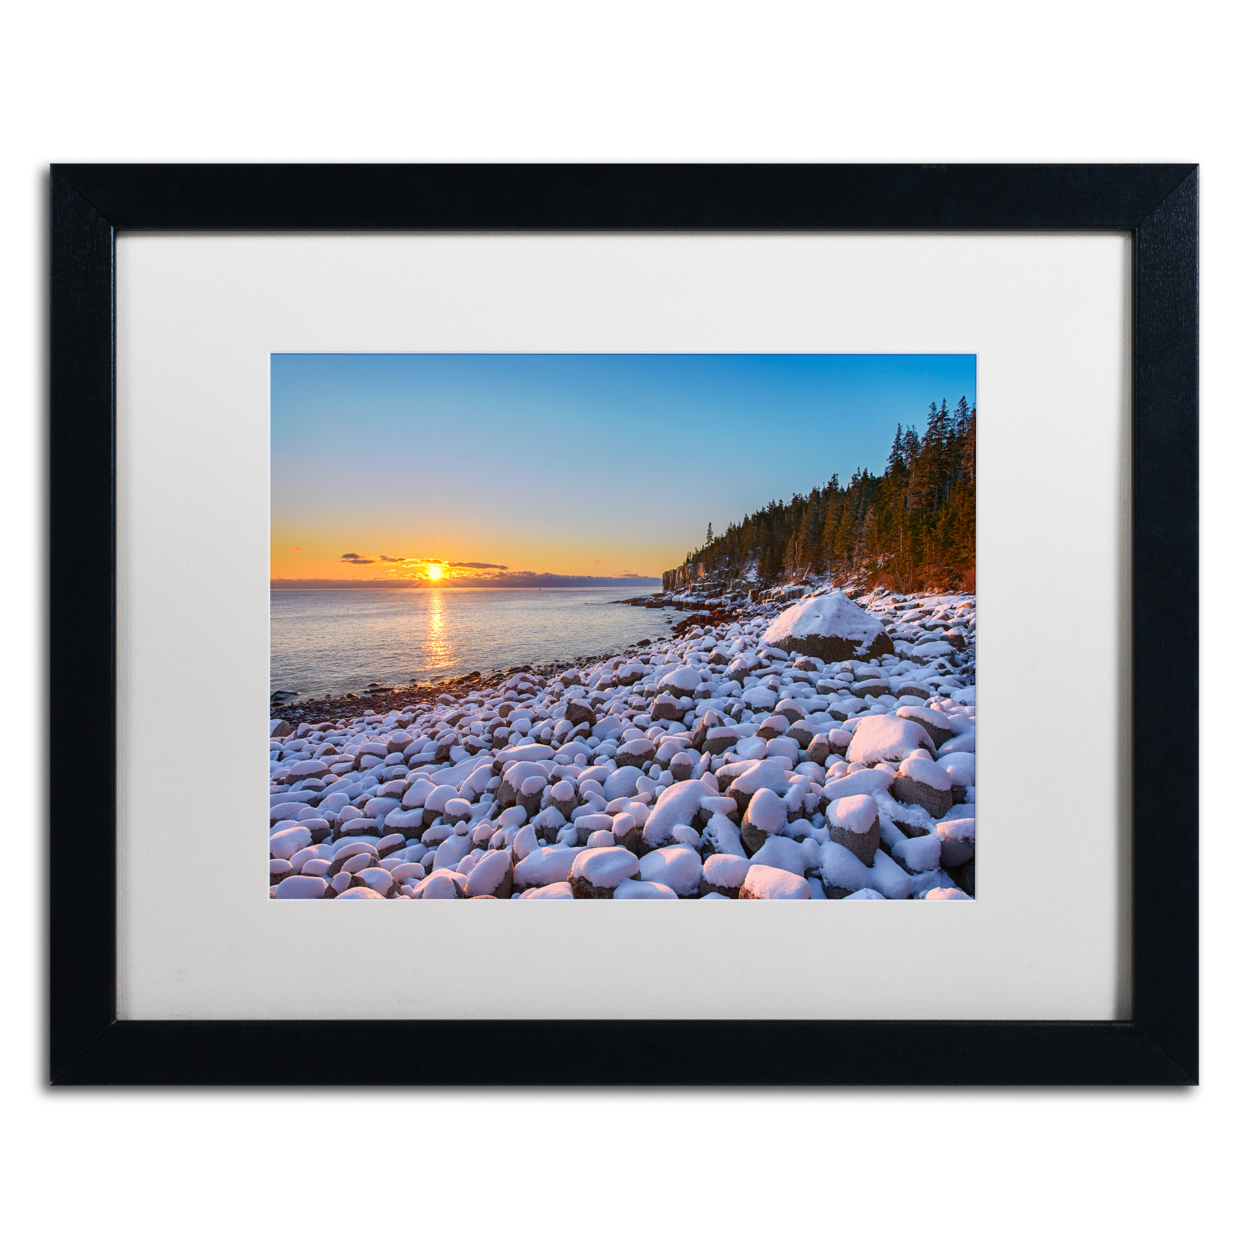 Michael Blanchette Photography 'White Boulders' Black Wooden Framed Art 18 X 22 Inches